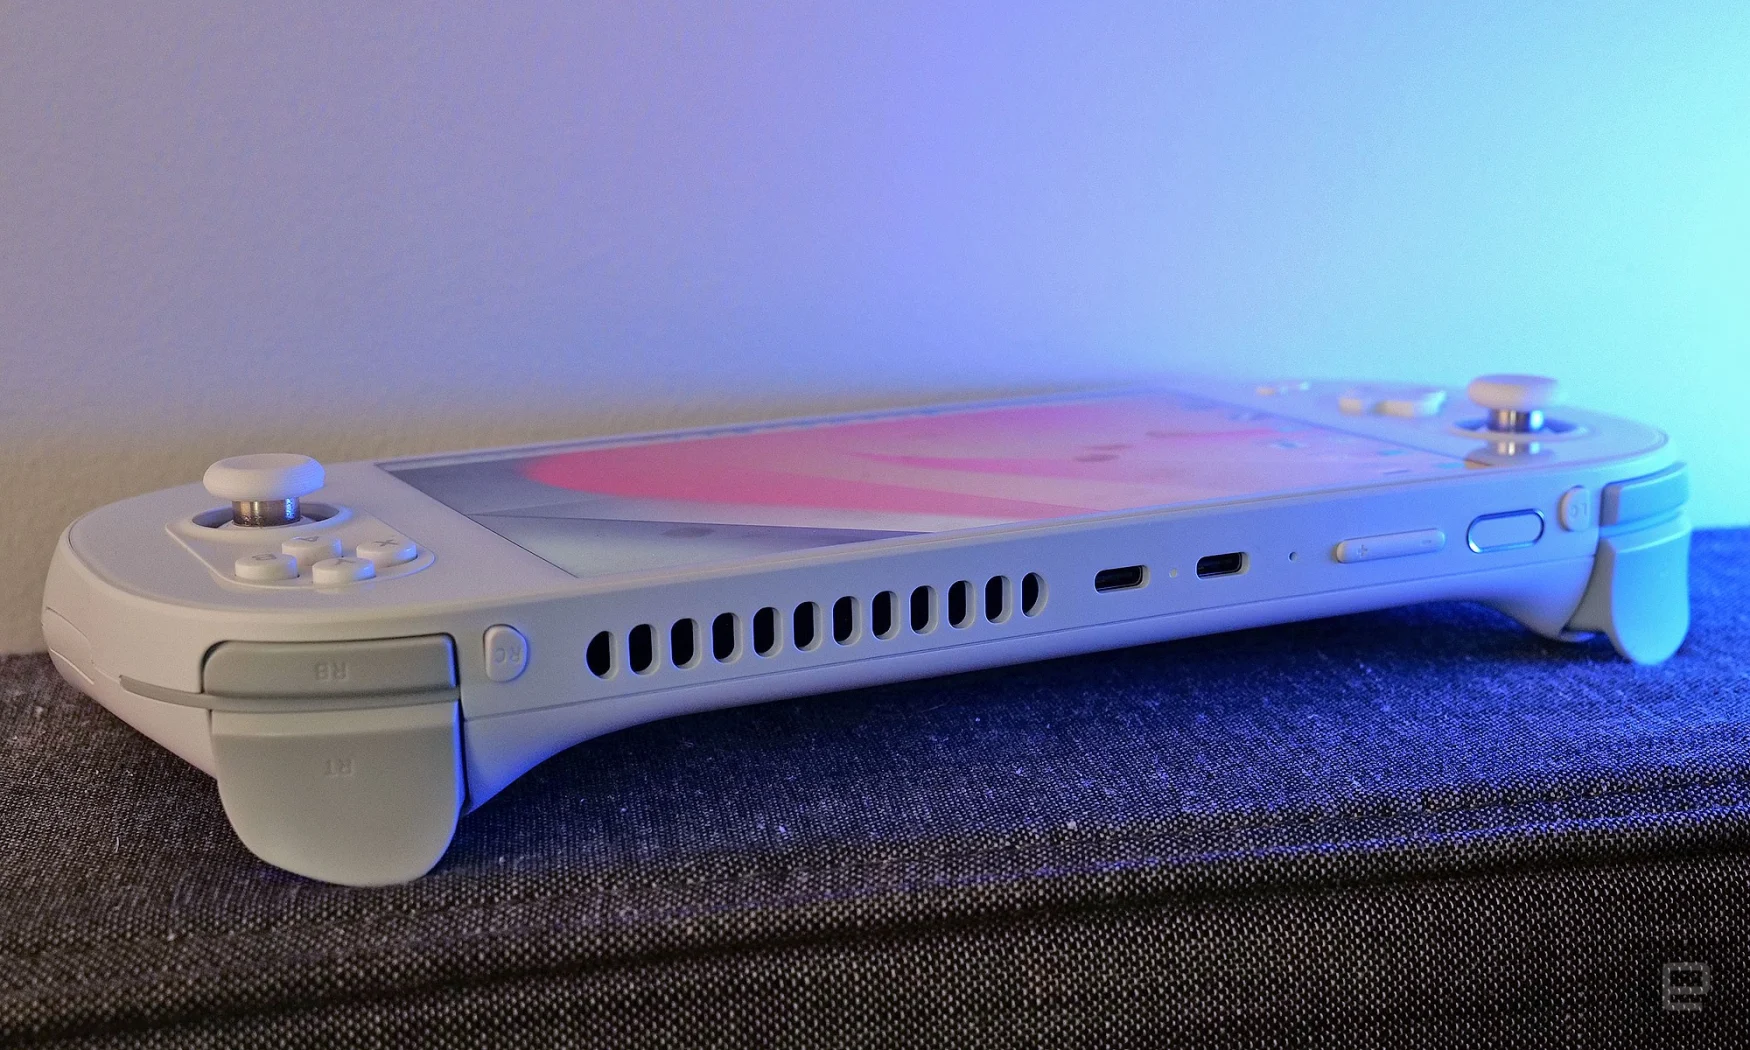 Unlike the Steam Deck, the Ayaneo 2 features a total of three USB-C ports, two of which can be used for charging. 